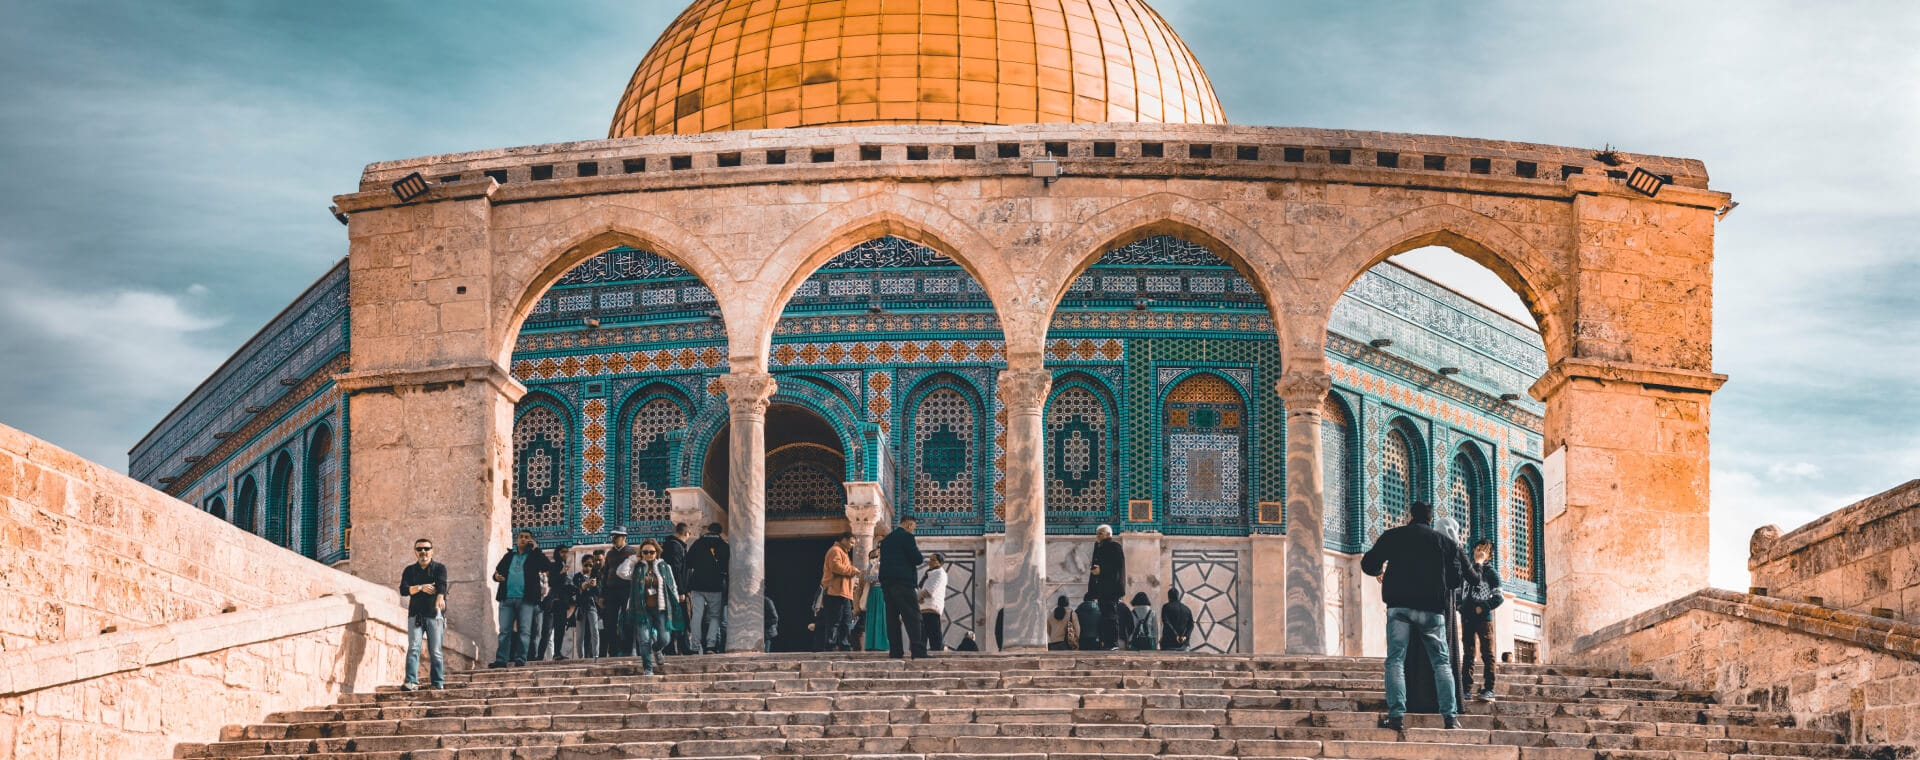 The dome of the rock in jerusalem.